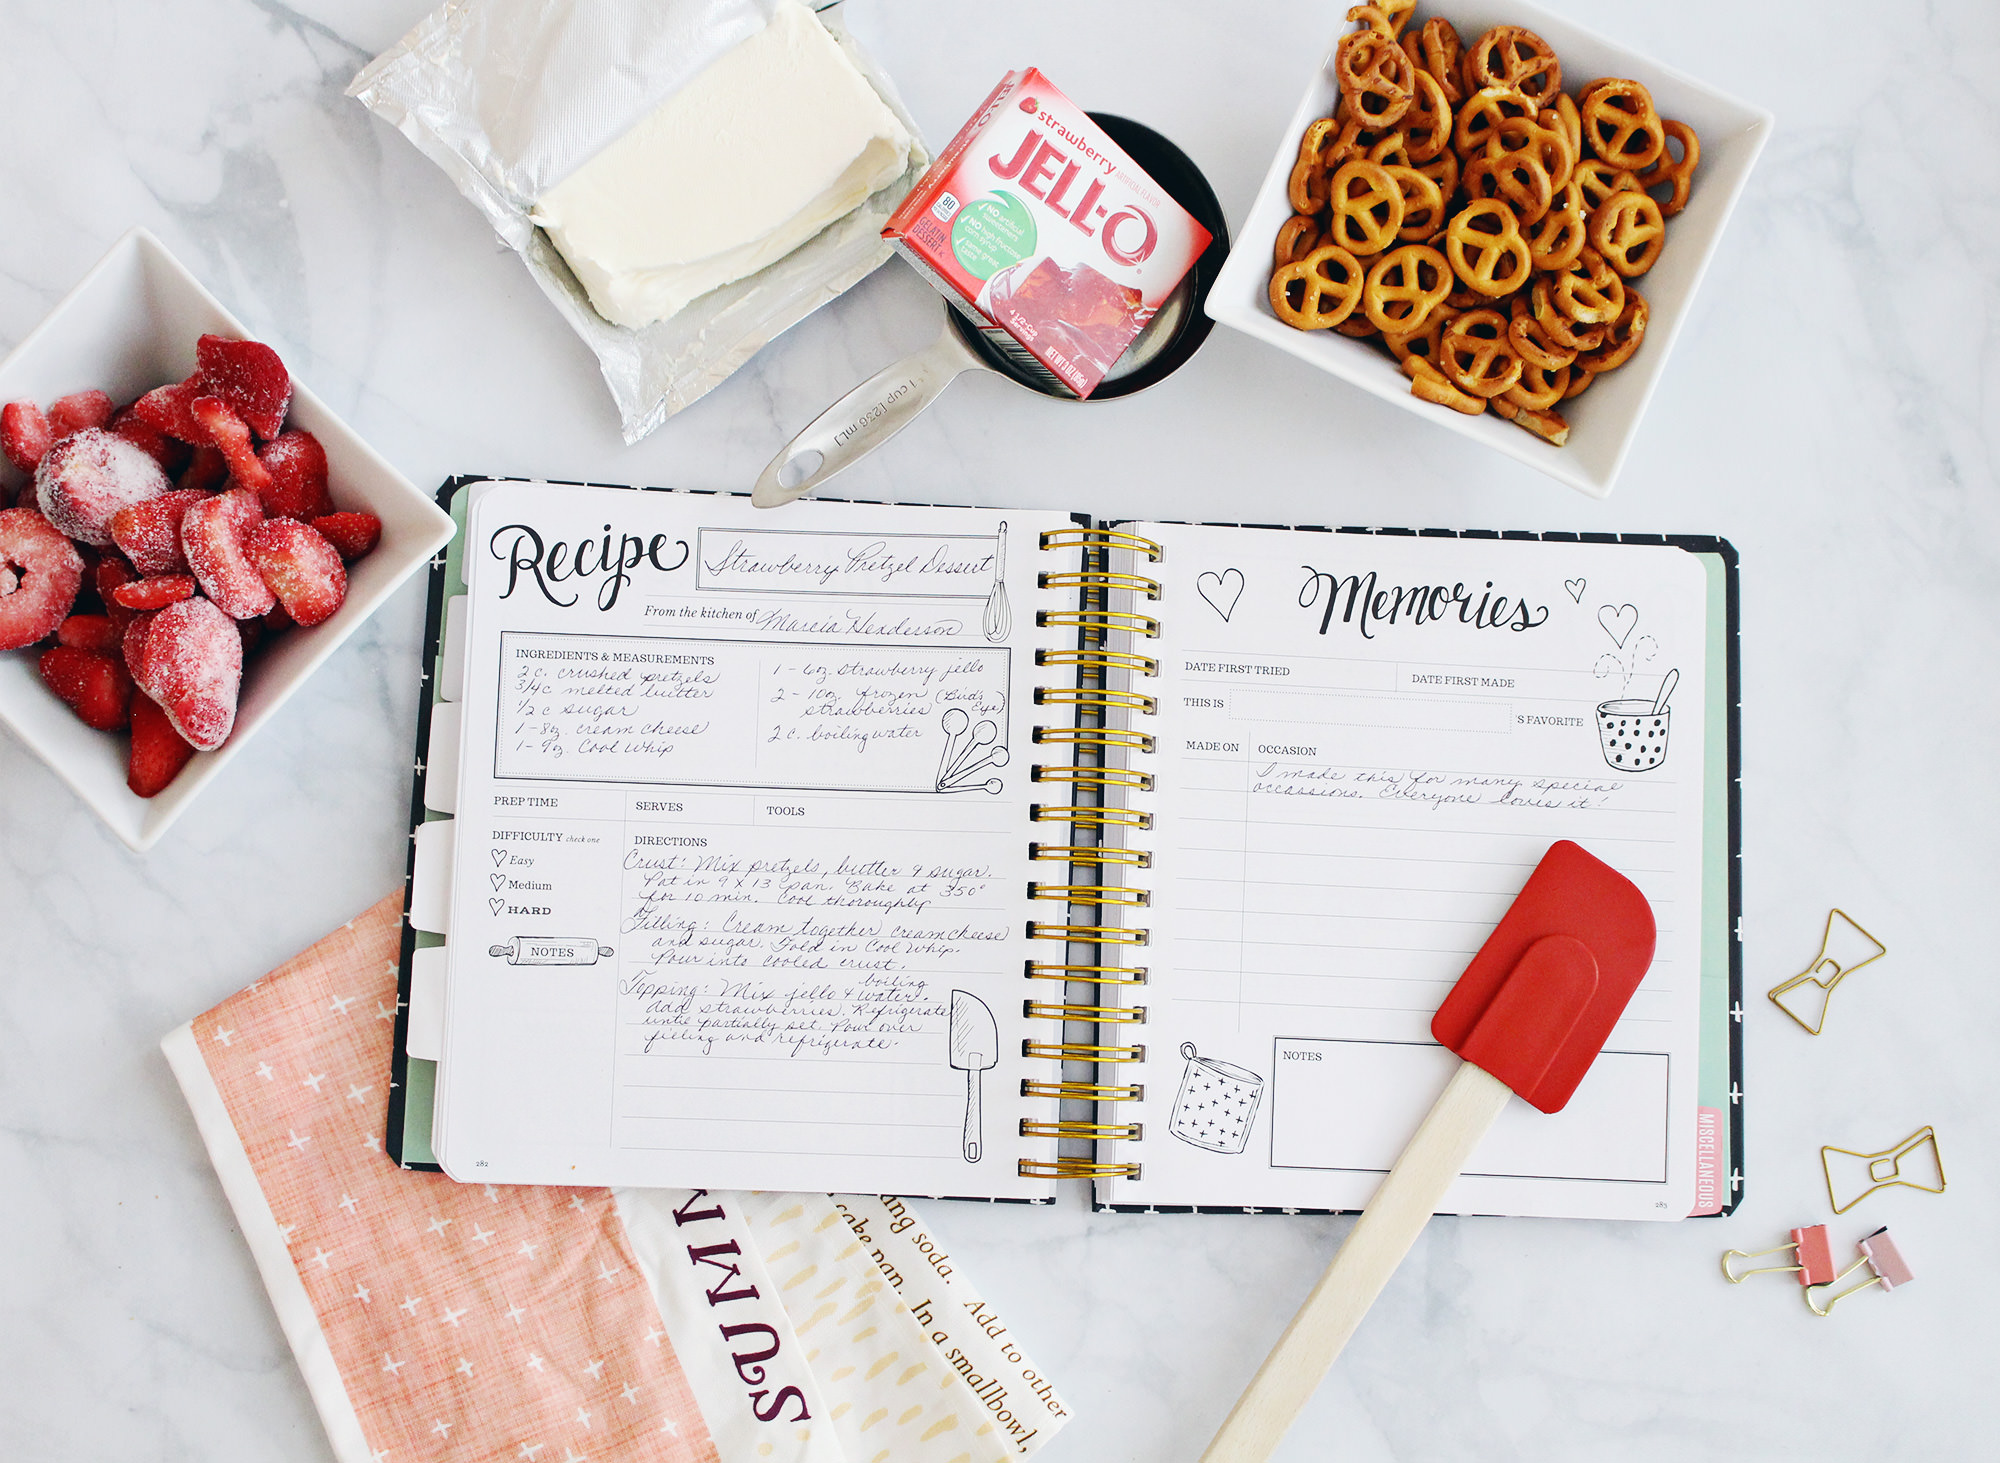 Use the Keepsake Kitchen Diary like a journal, recording special dates, memories, and occasions surrounding your family recipes